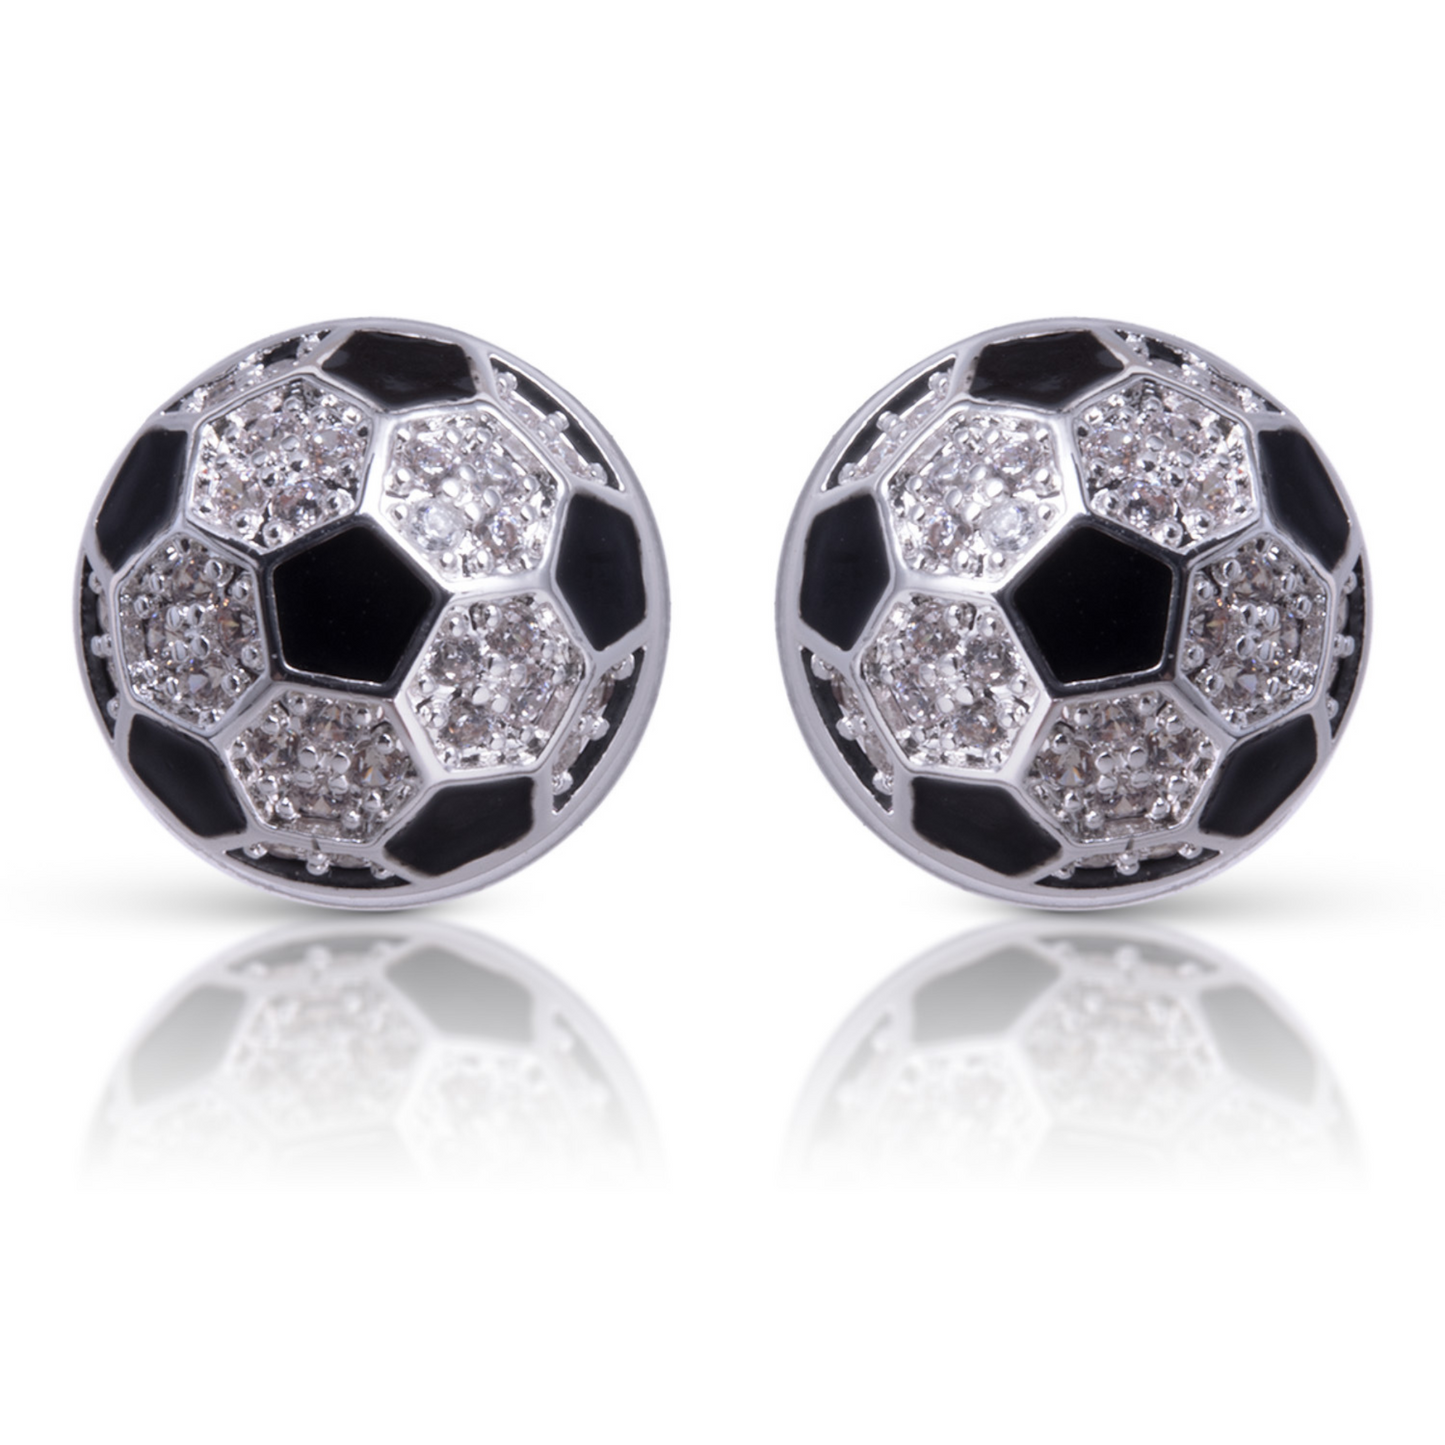 Take your love of soccer from the field to your ears with our Soccer Ball Stud Earrings. These stunning earrings feature a detailed soccer ball design with sparkling rhinestone accents. Made from silver, these studs are a must-have for any soccer fan. Score a goal with your style today!